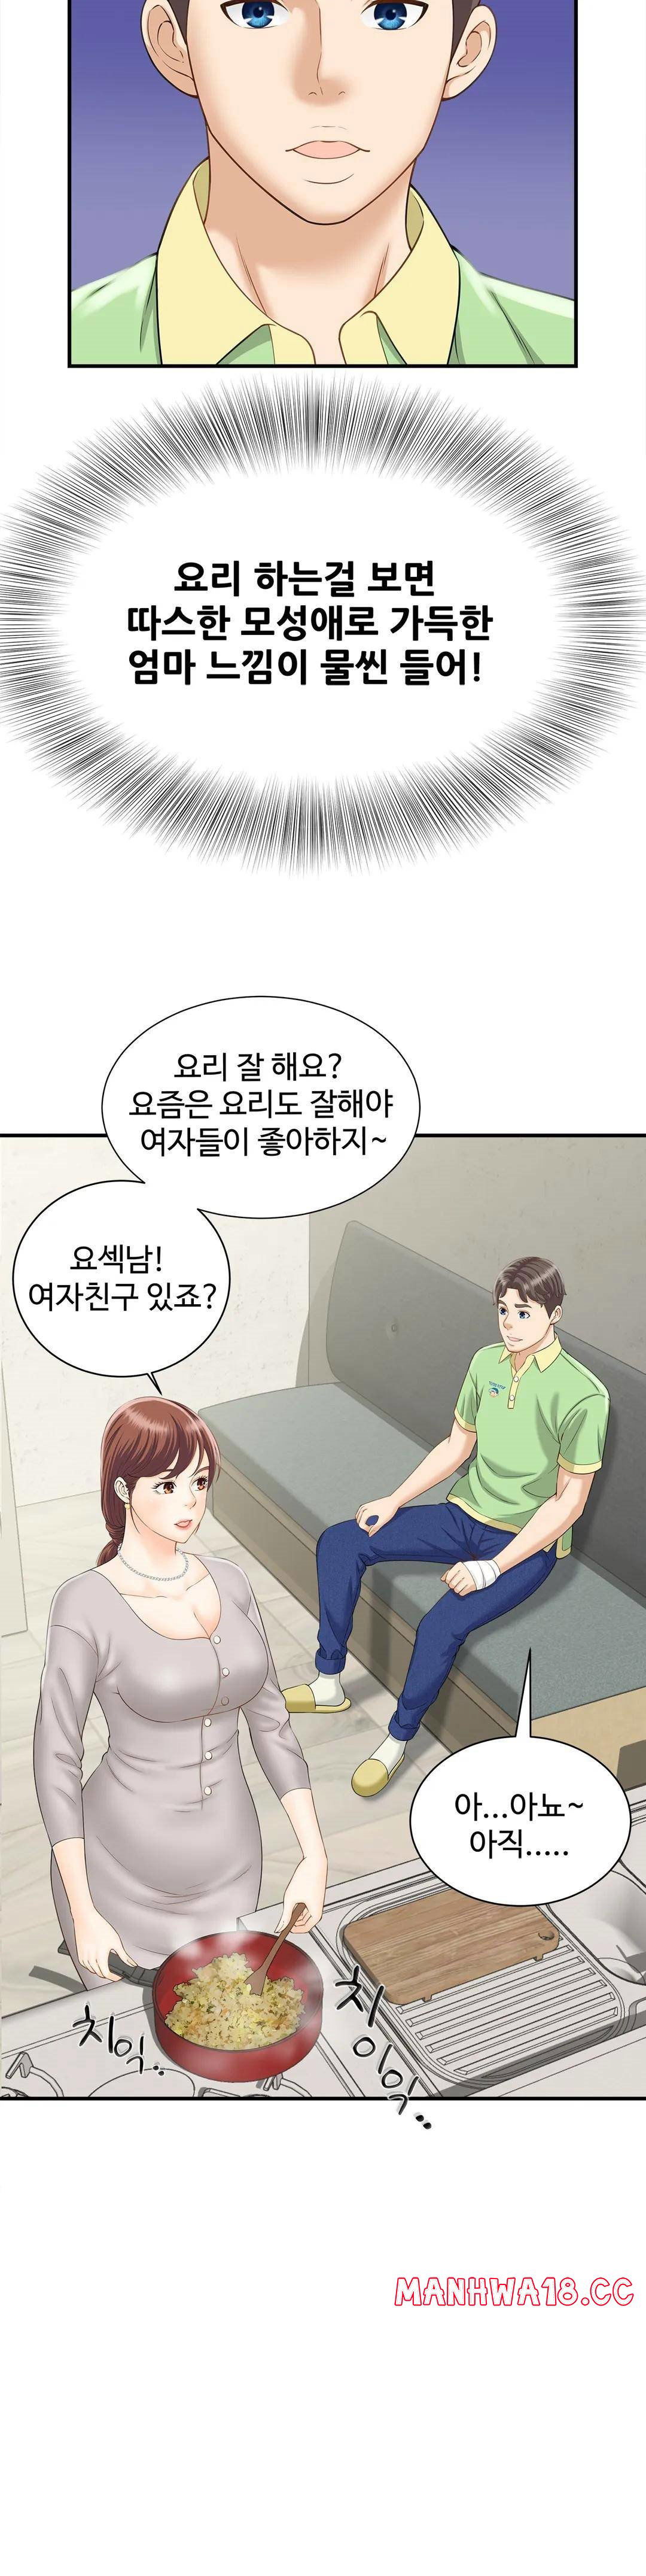 the-hunt-for-married-women-raw-chap-3-12